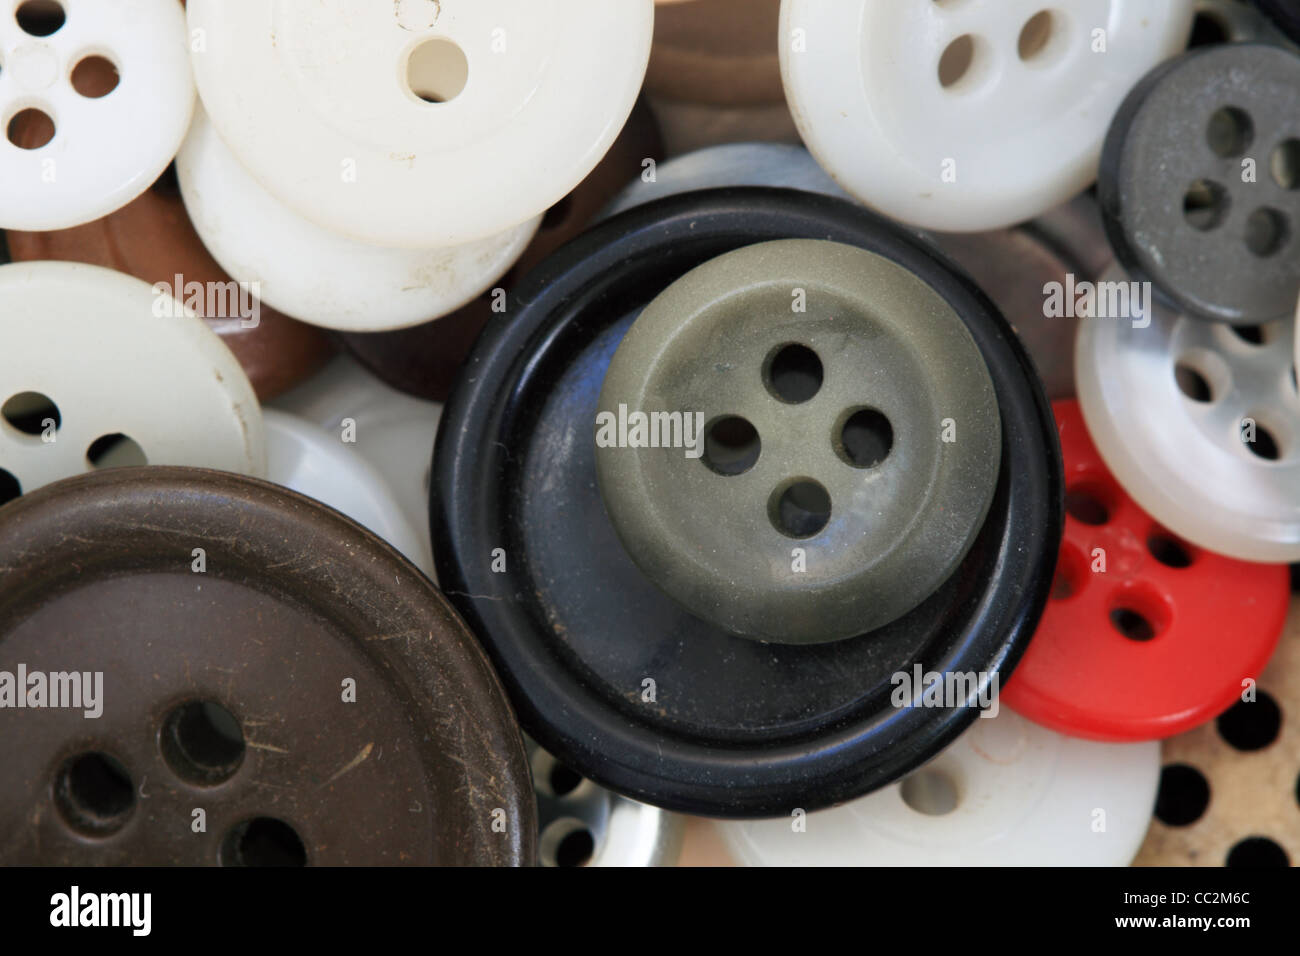 macro image of many different old used buttons Stock Photo